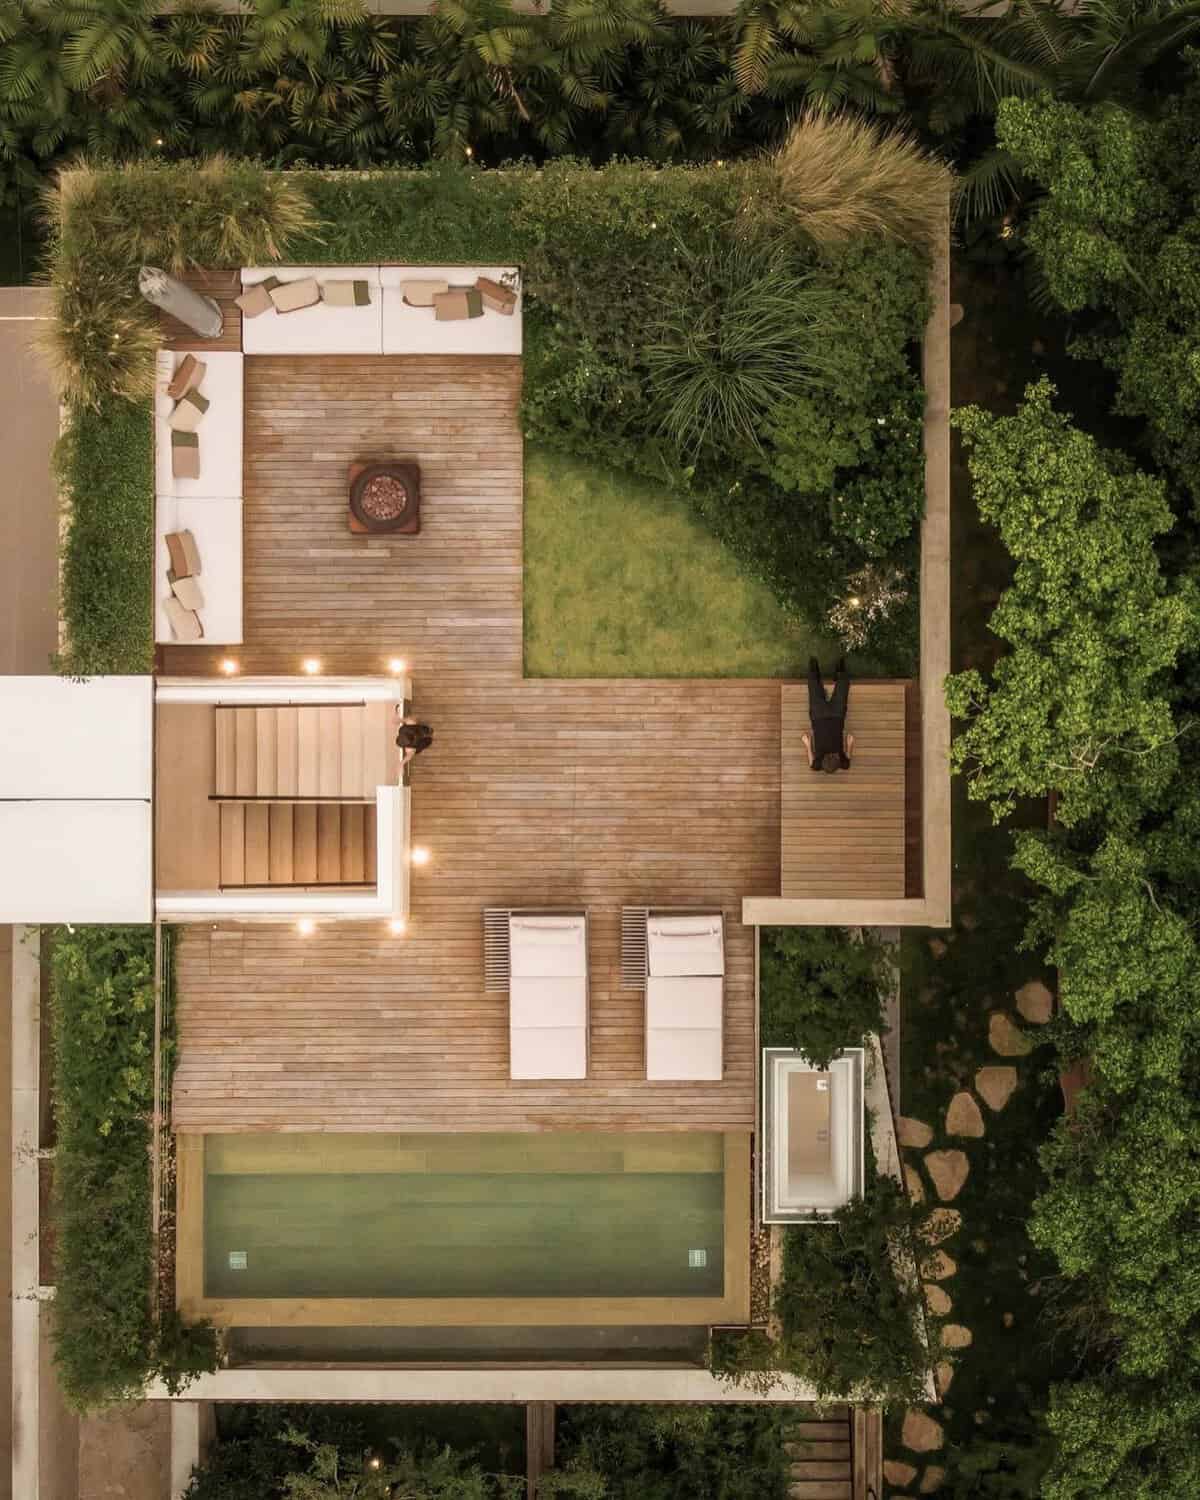 An aerial view of a house with a swimming pool.